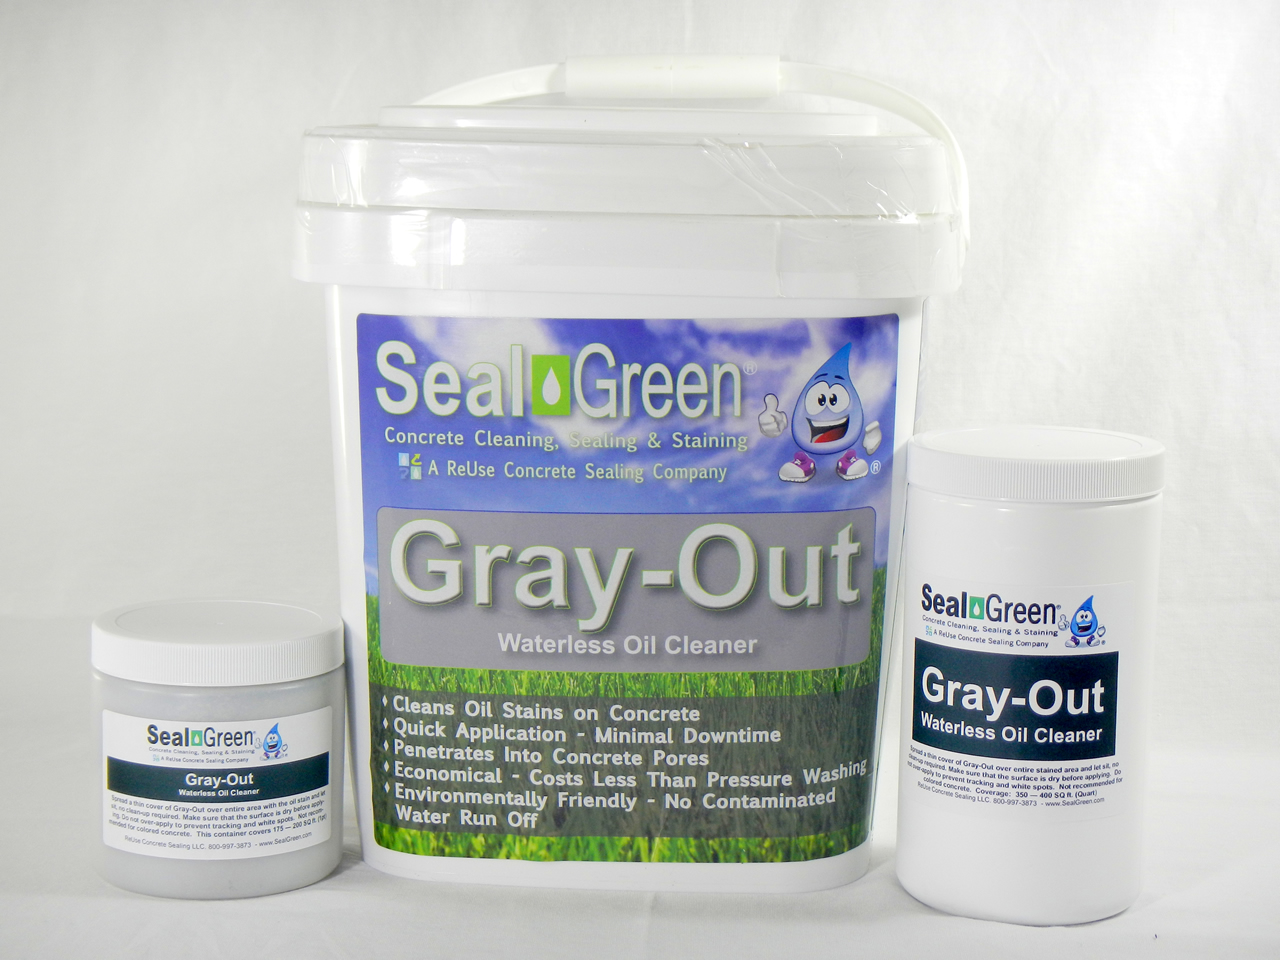 Does SealGreen Gray-Out whitens the concrete? How long as guarantee to last? If it rains does it wash away? So do you have ke